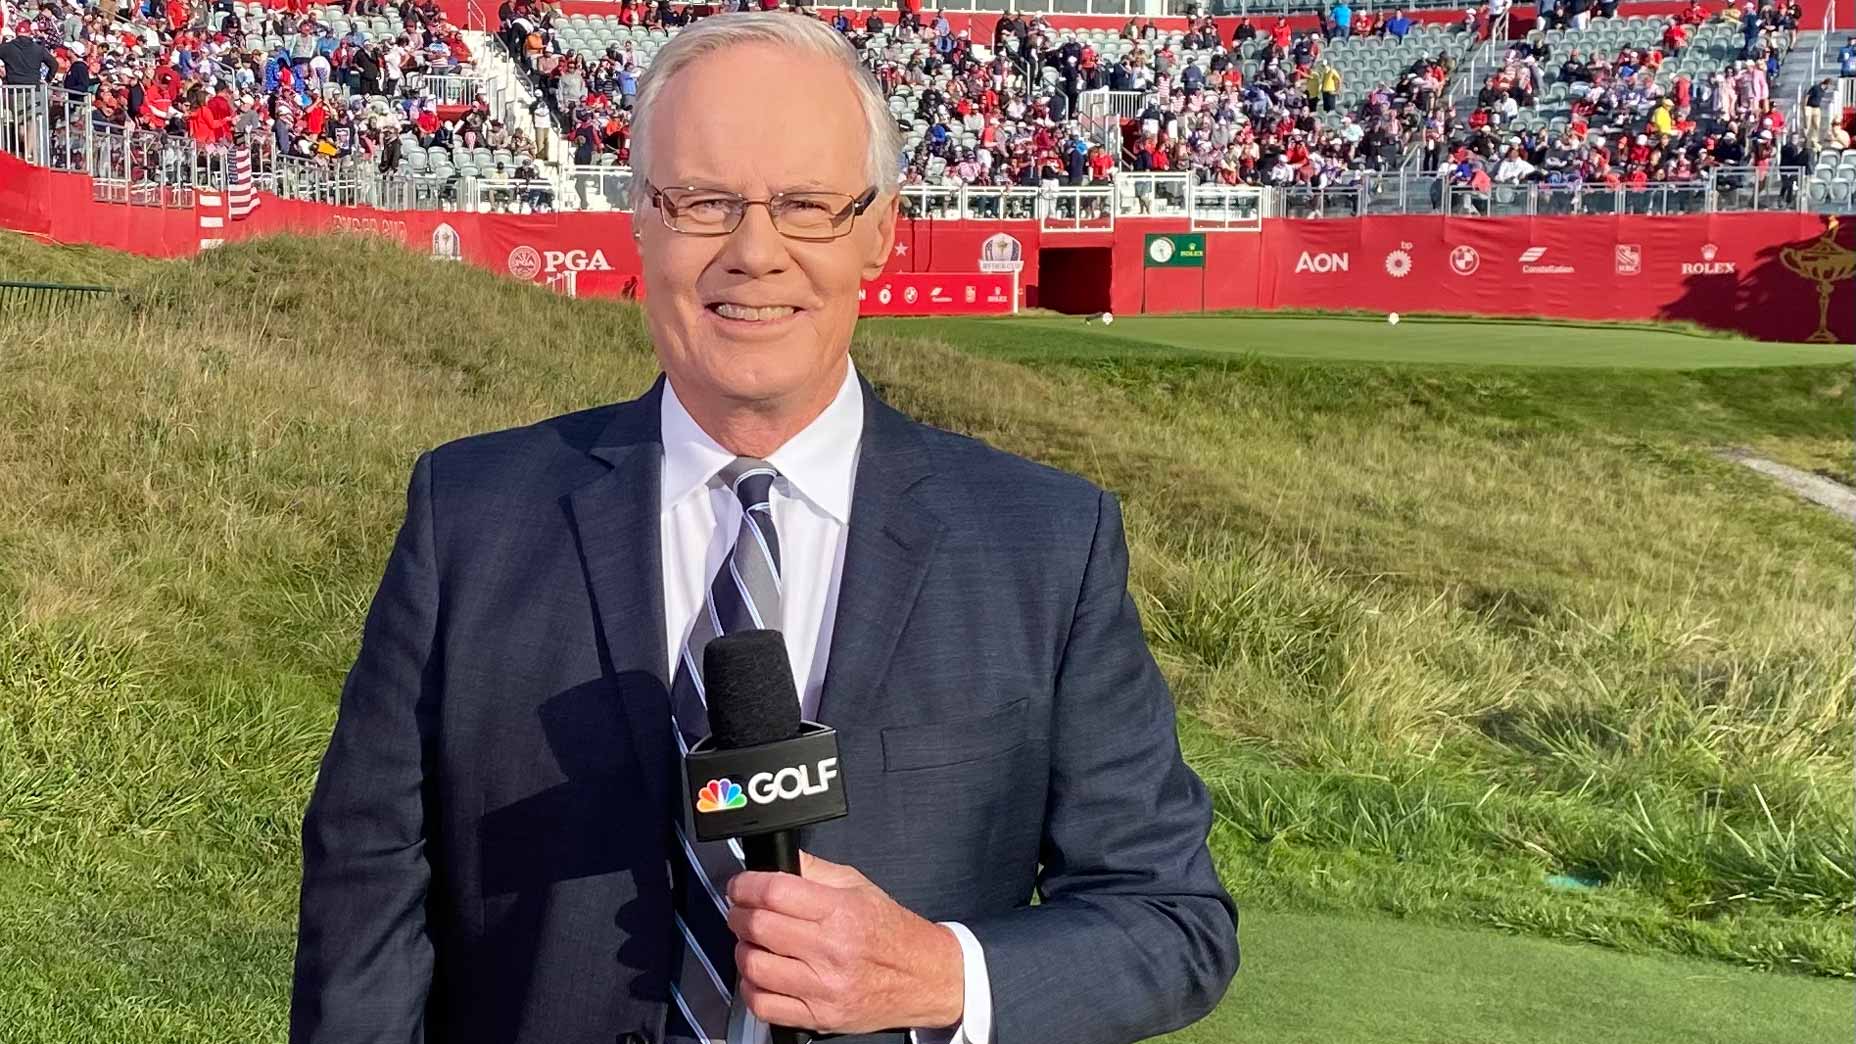 Mark Rolfing 'absolutely thrilled' with new NBC/Golf Channel deal BVM